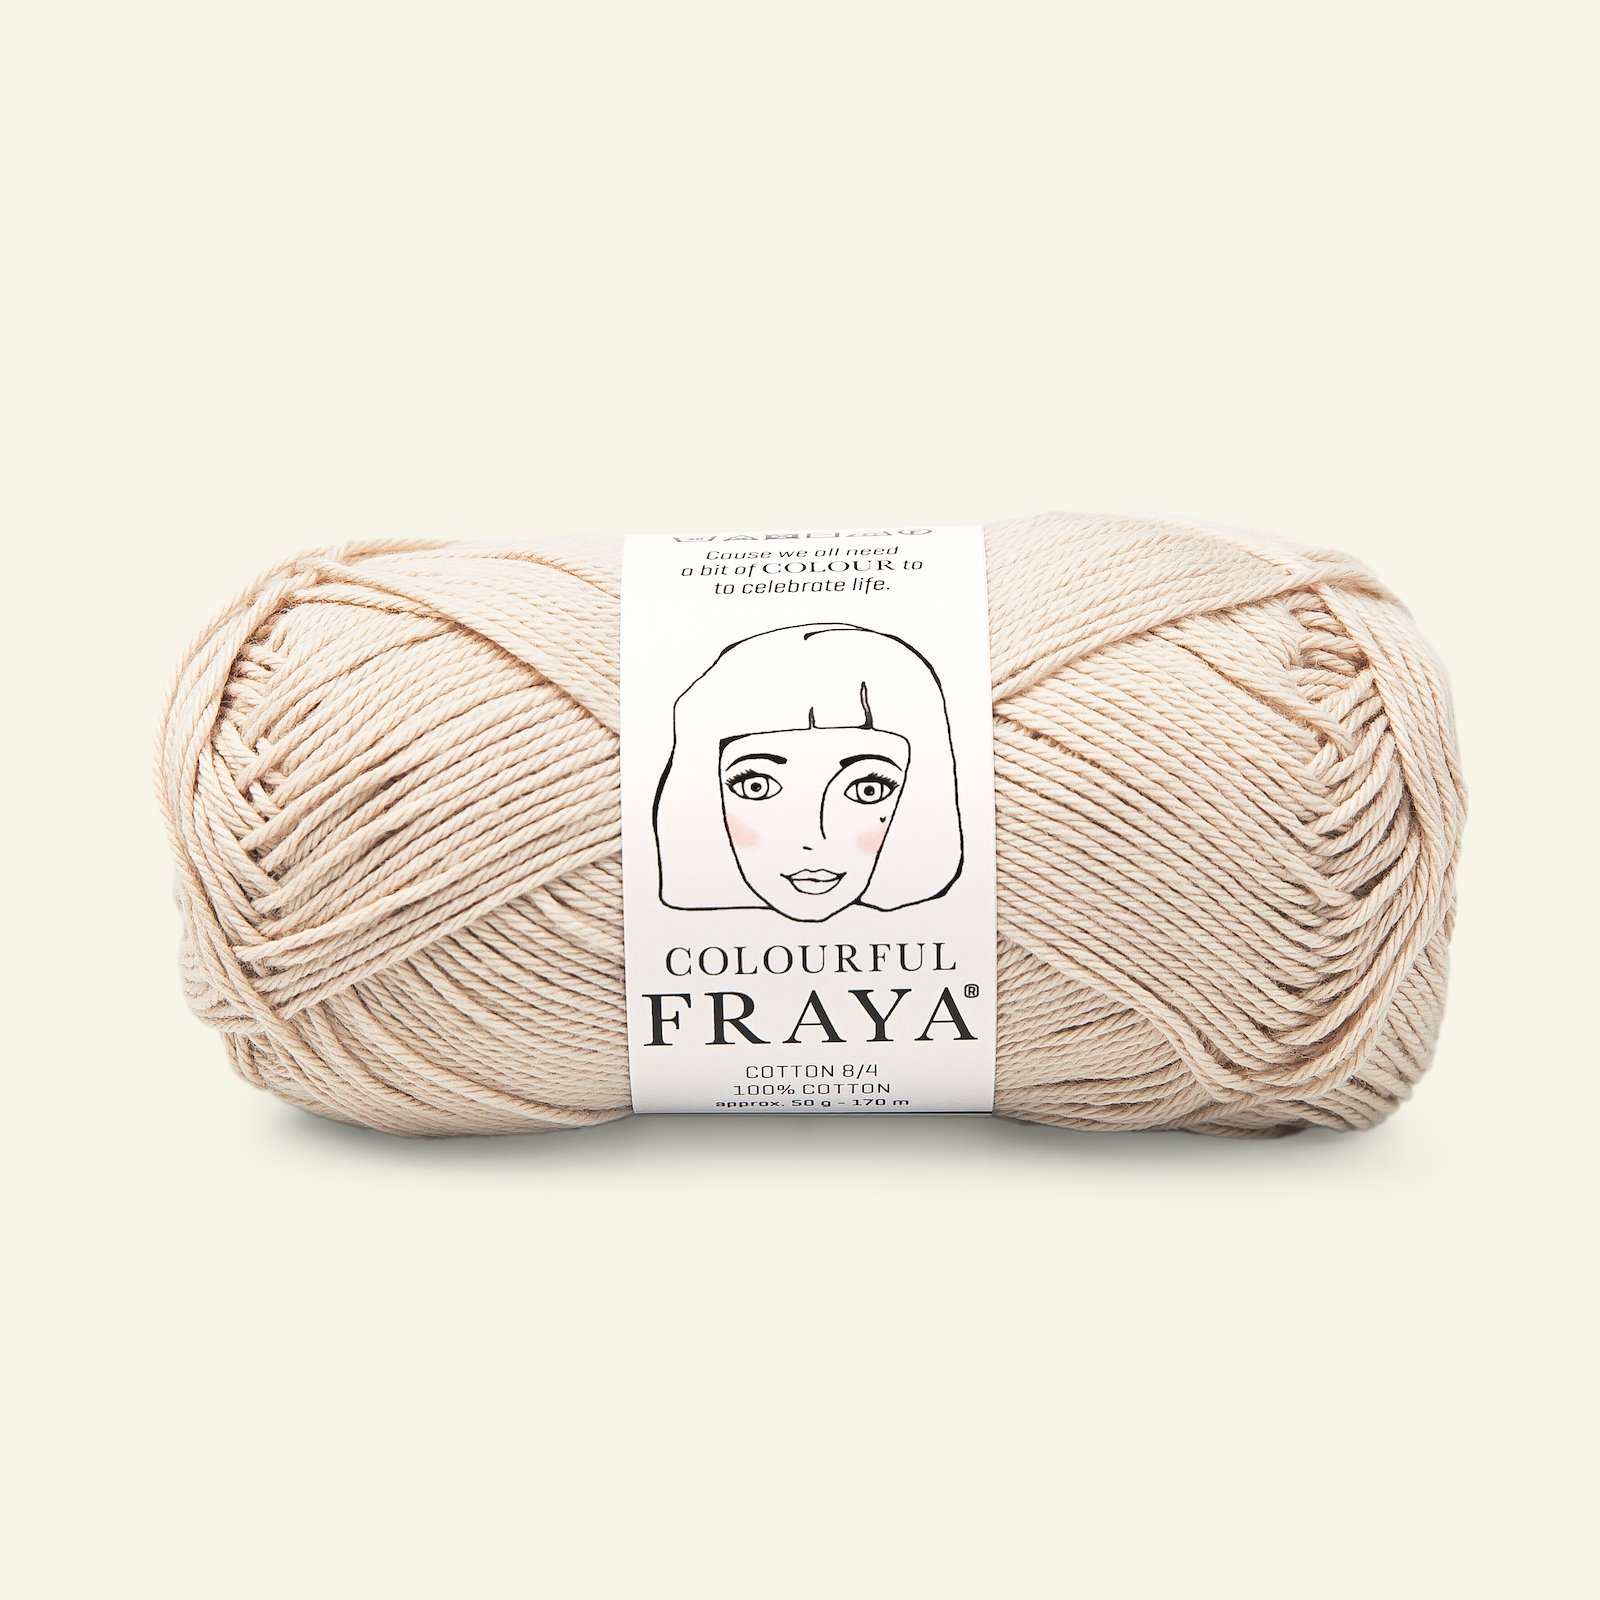 FRAYA, 100% Baumwolle, Cotton 8/4, "Colourful",  Puder 90060072_pack